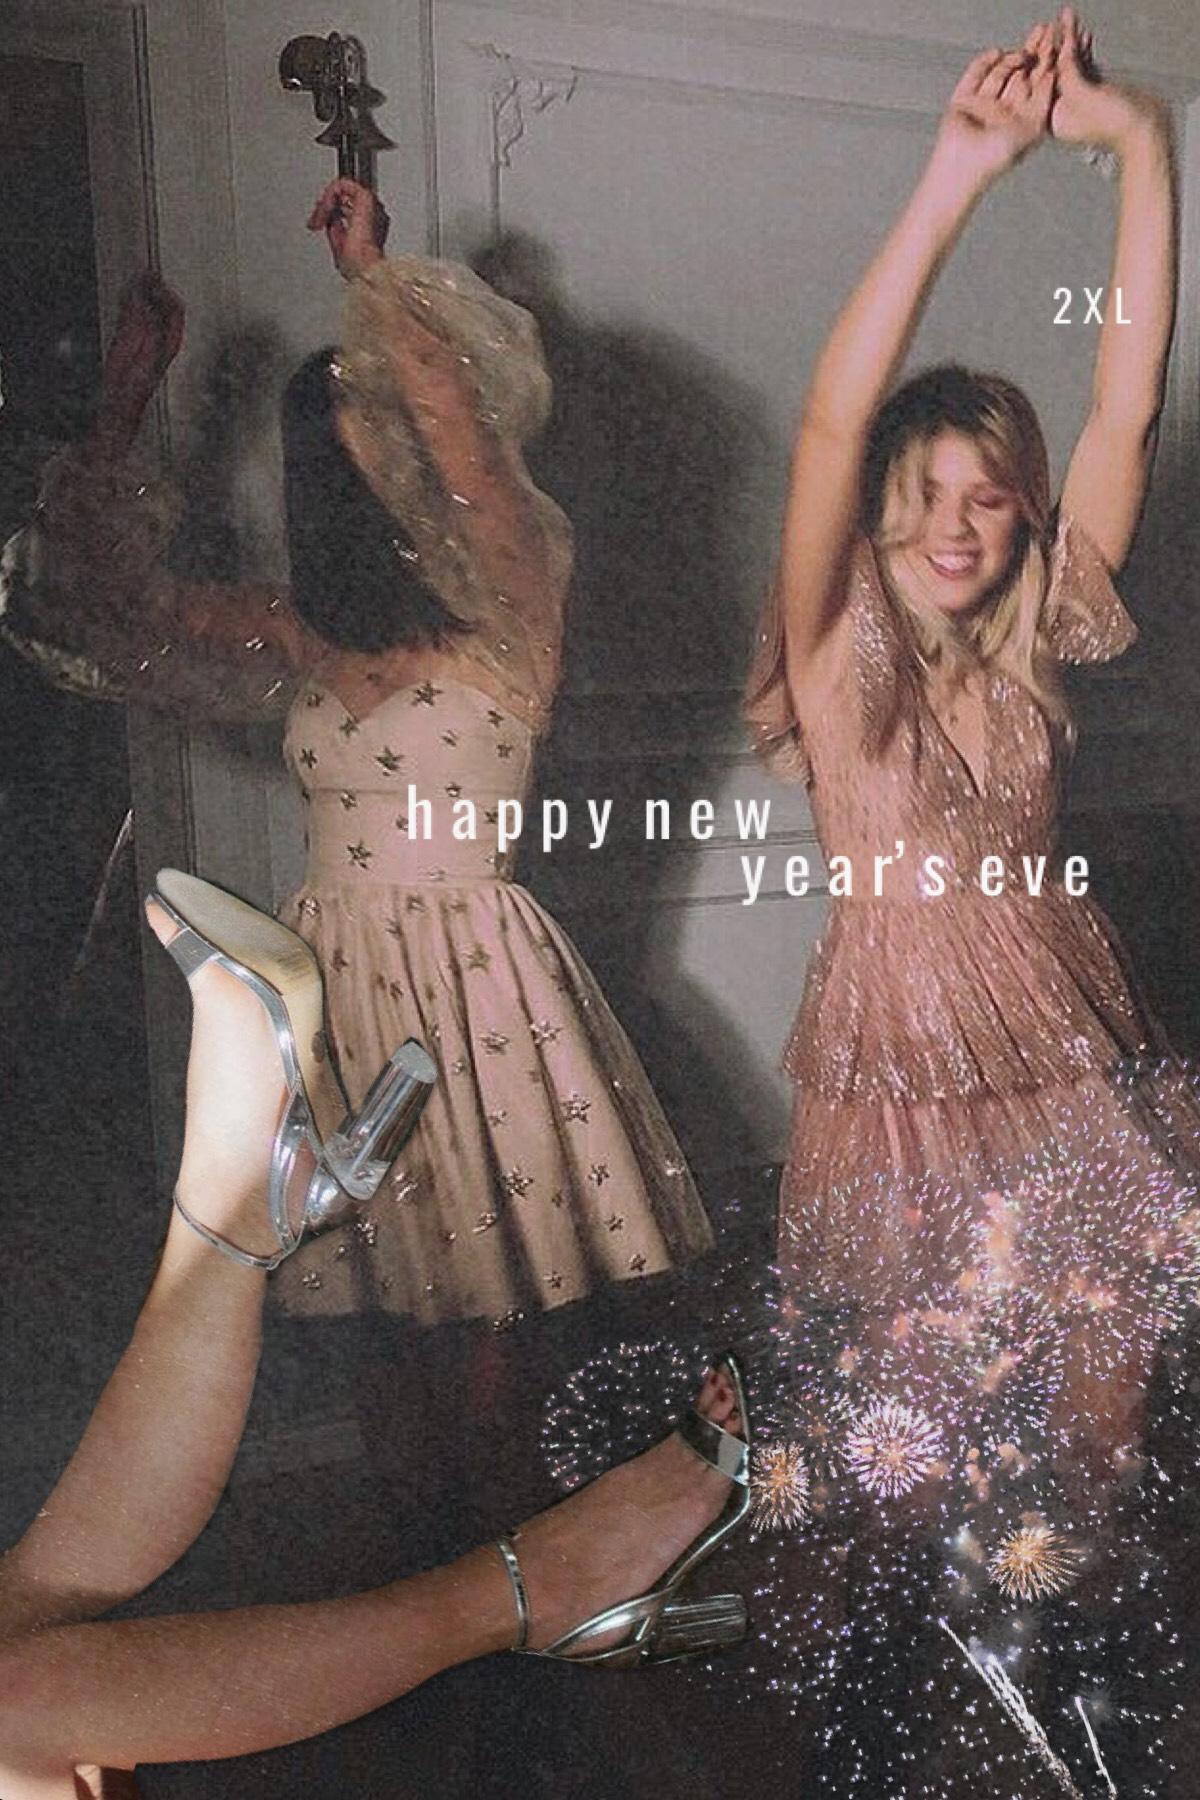 happy new year’s eve!🎆 i hope 2018 treated you well & i hope 2019 treats you even better💫
btw i love the dress of the girl on the left so much! it’s the prettiest thing ever & i would love to have it lol🔮